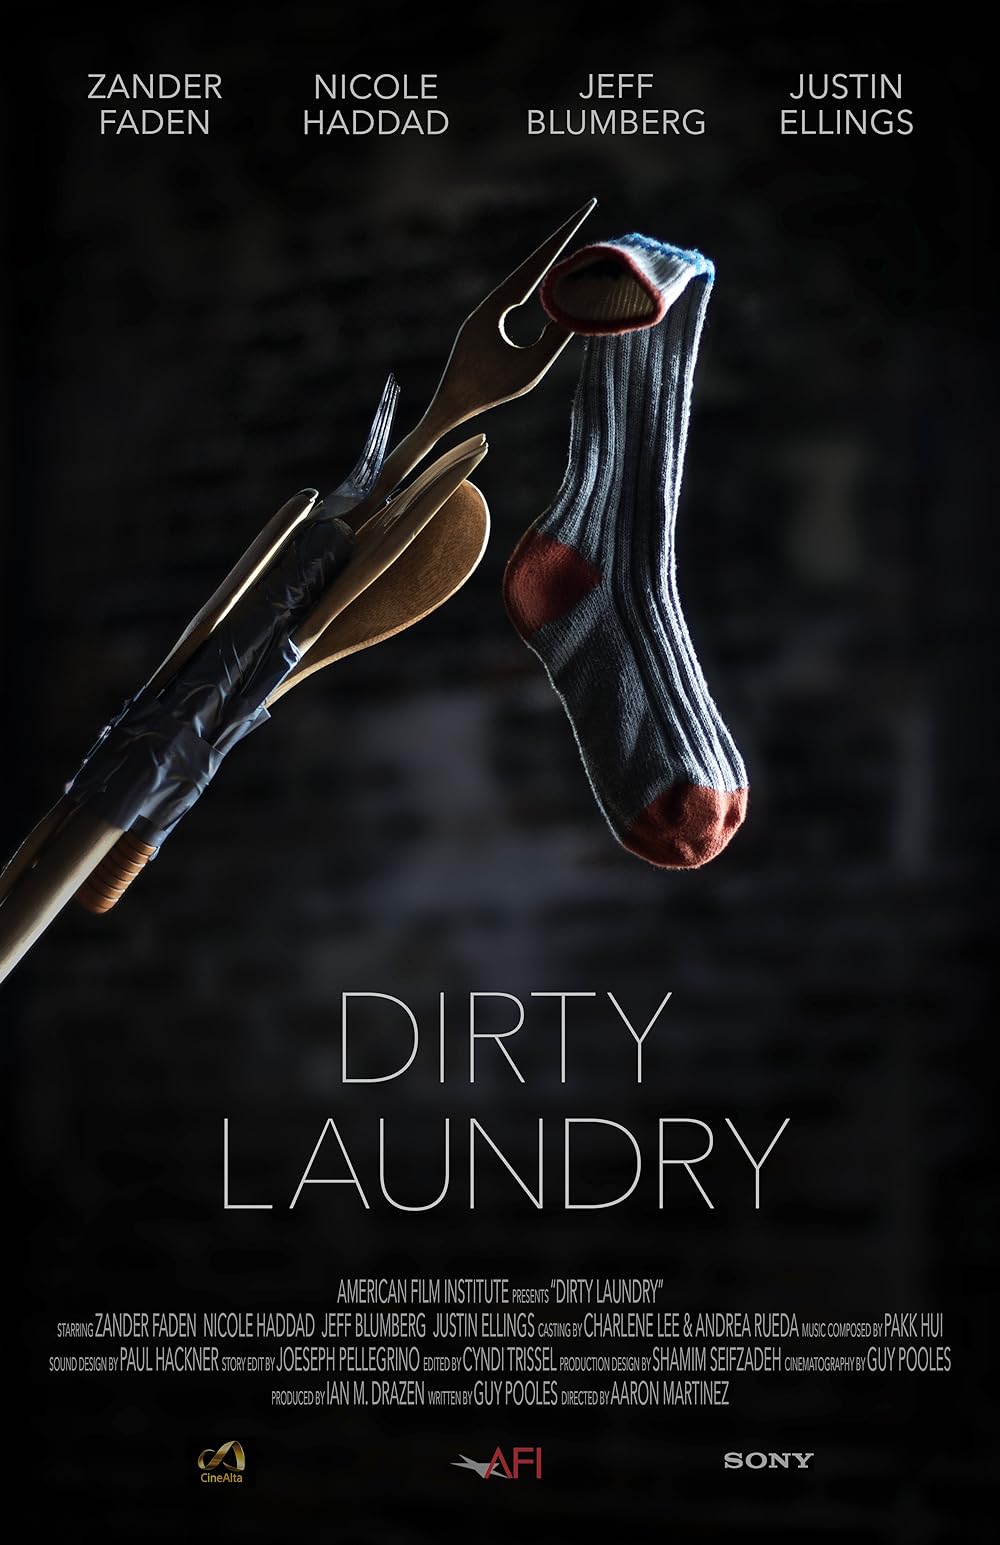 craig blomberg recommends dirty laundry movie online pic